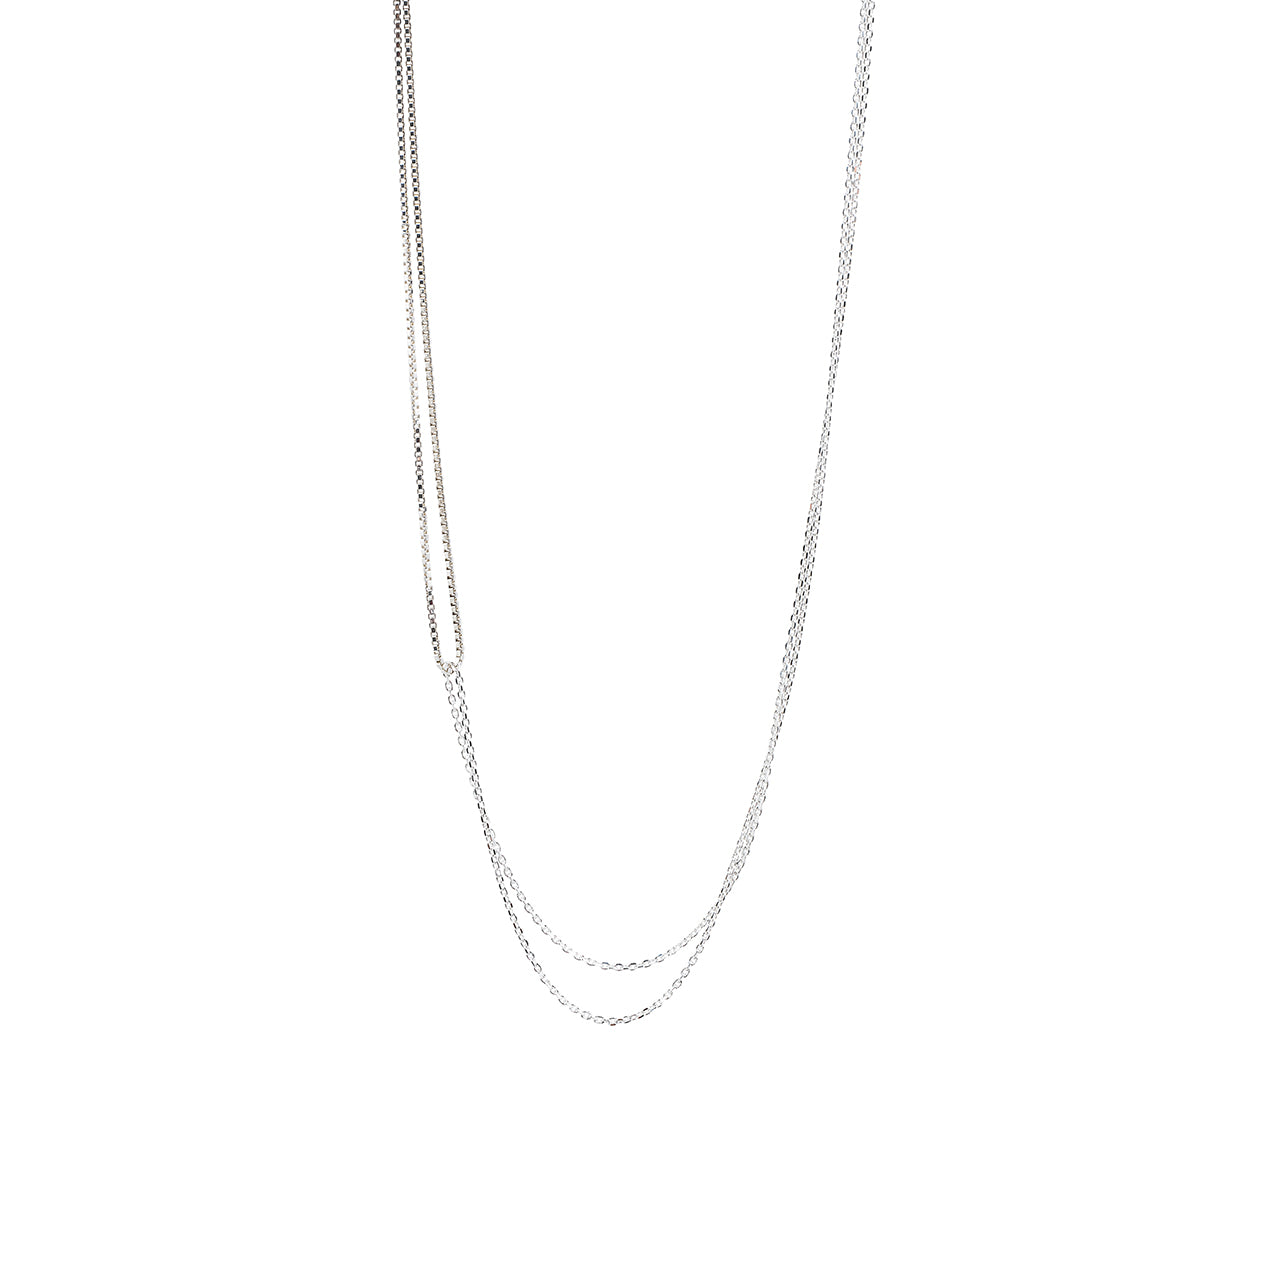 silver two looped chain necklace